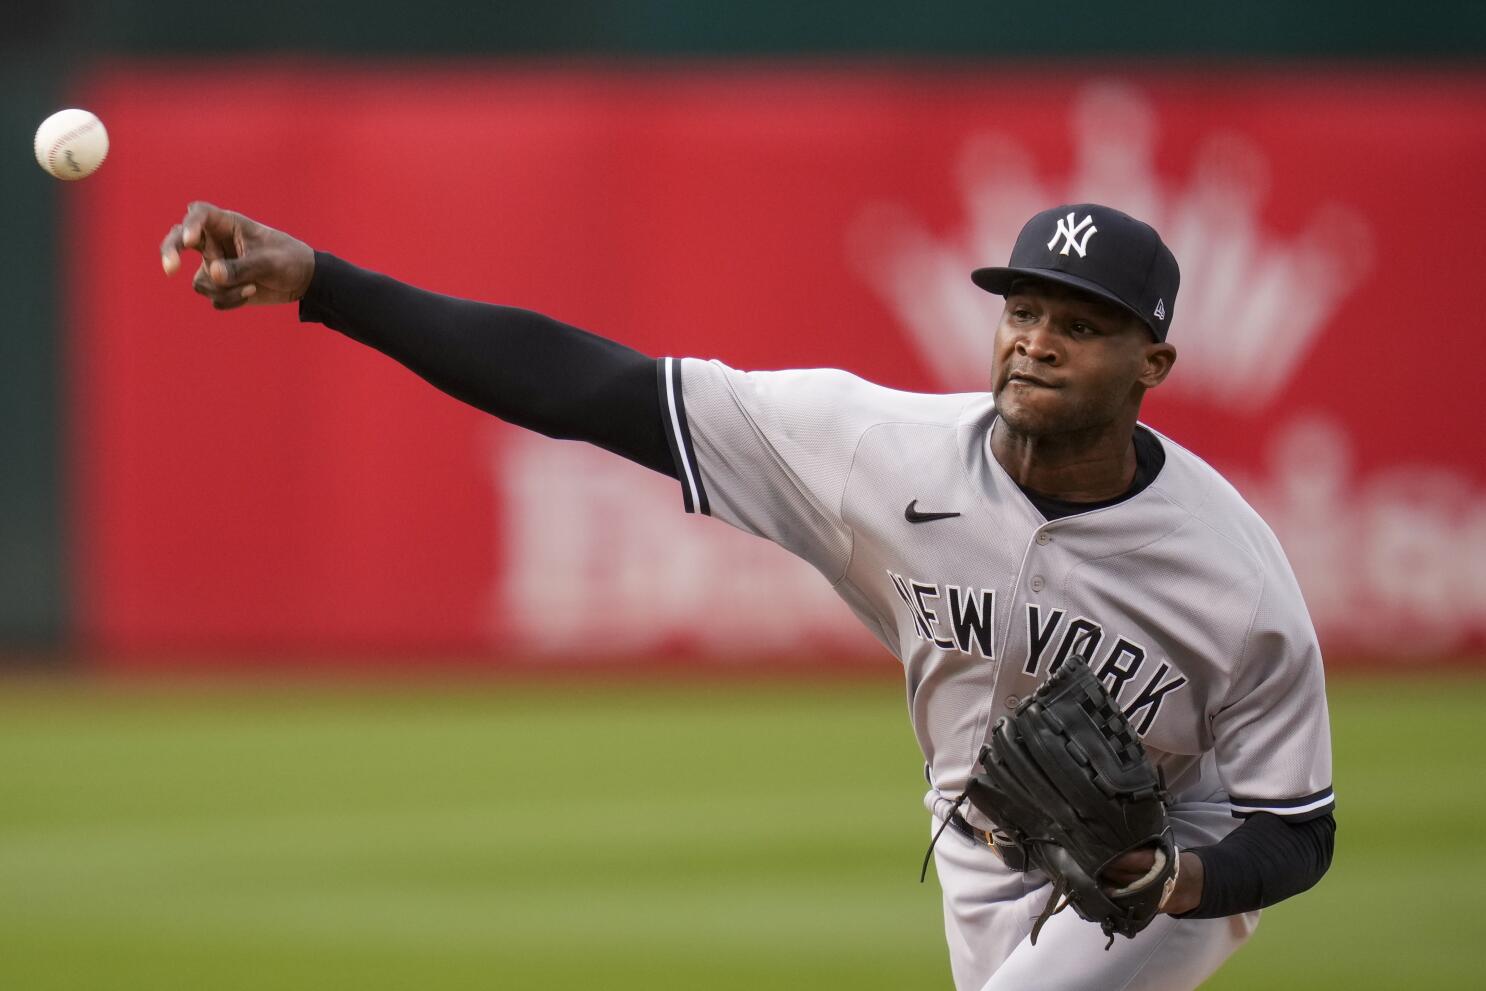 Yankees pitcher Domingo Germán throws perfect game against Oakland